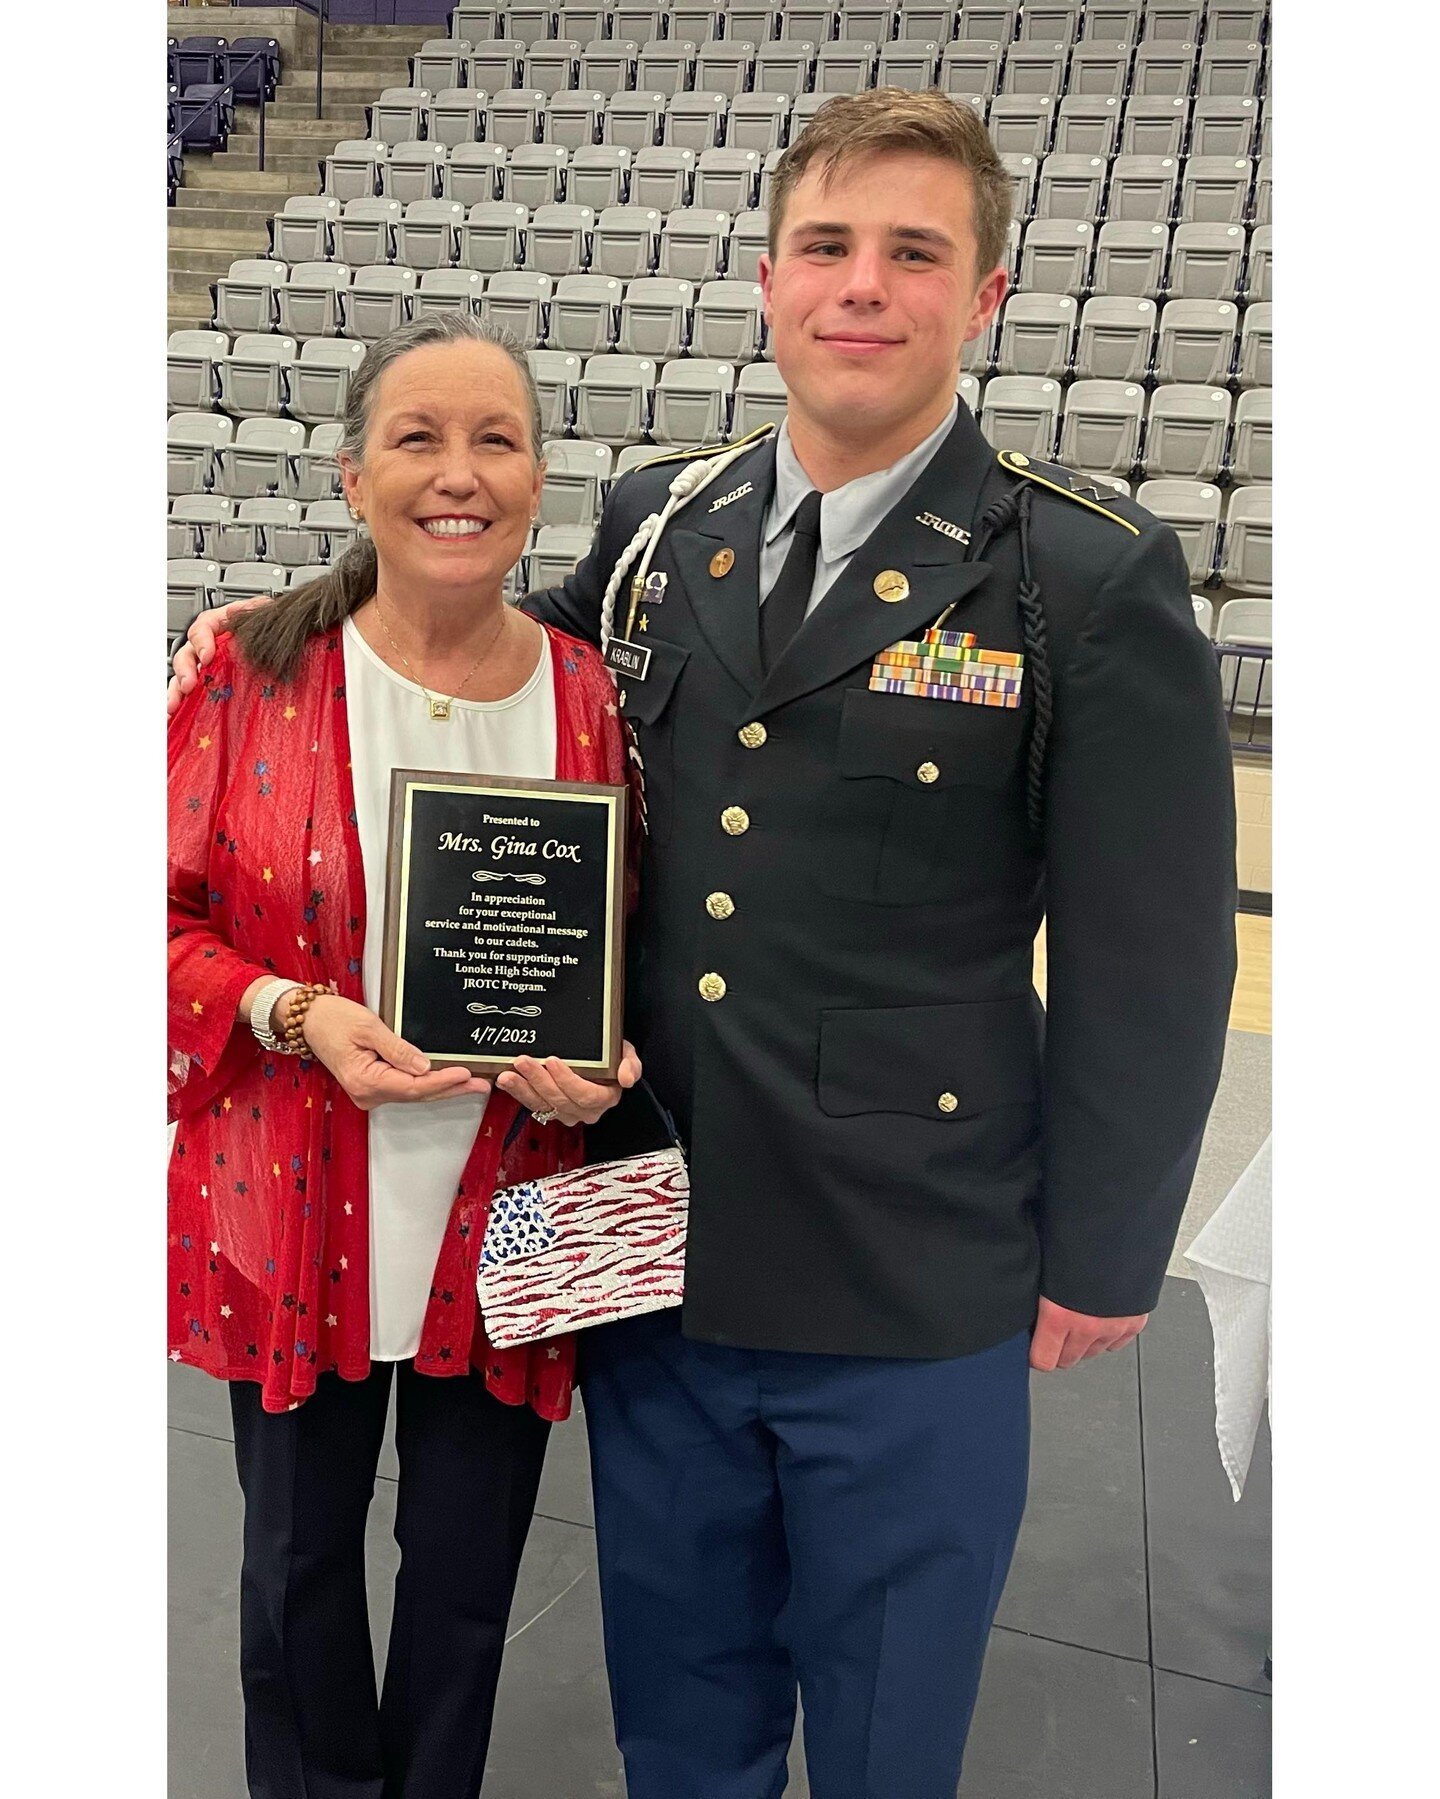 Two of our very own attended the Lonoke High School JROTC annual banquet last week. Gigi/Gina, our owner, attended as the guest speaker, and Cole Krablin attended as a cadet in the program. When Cole is not working with us, one of his many titles is 